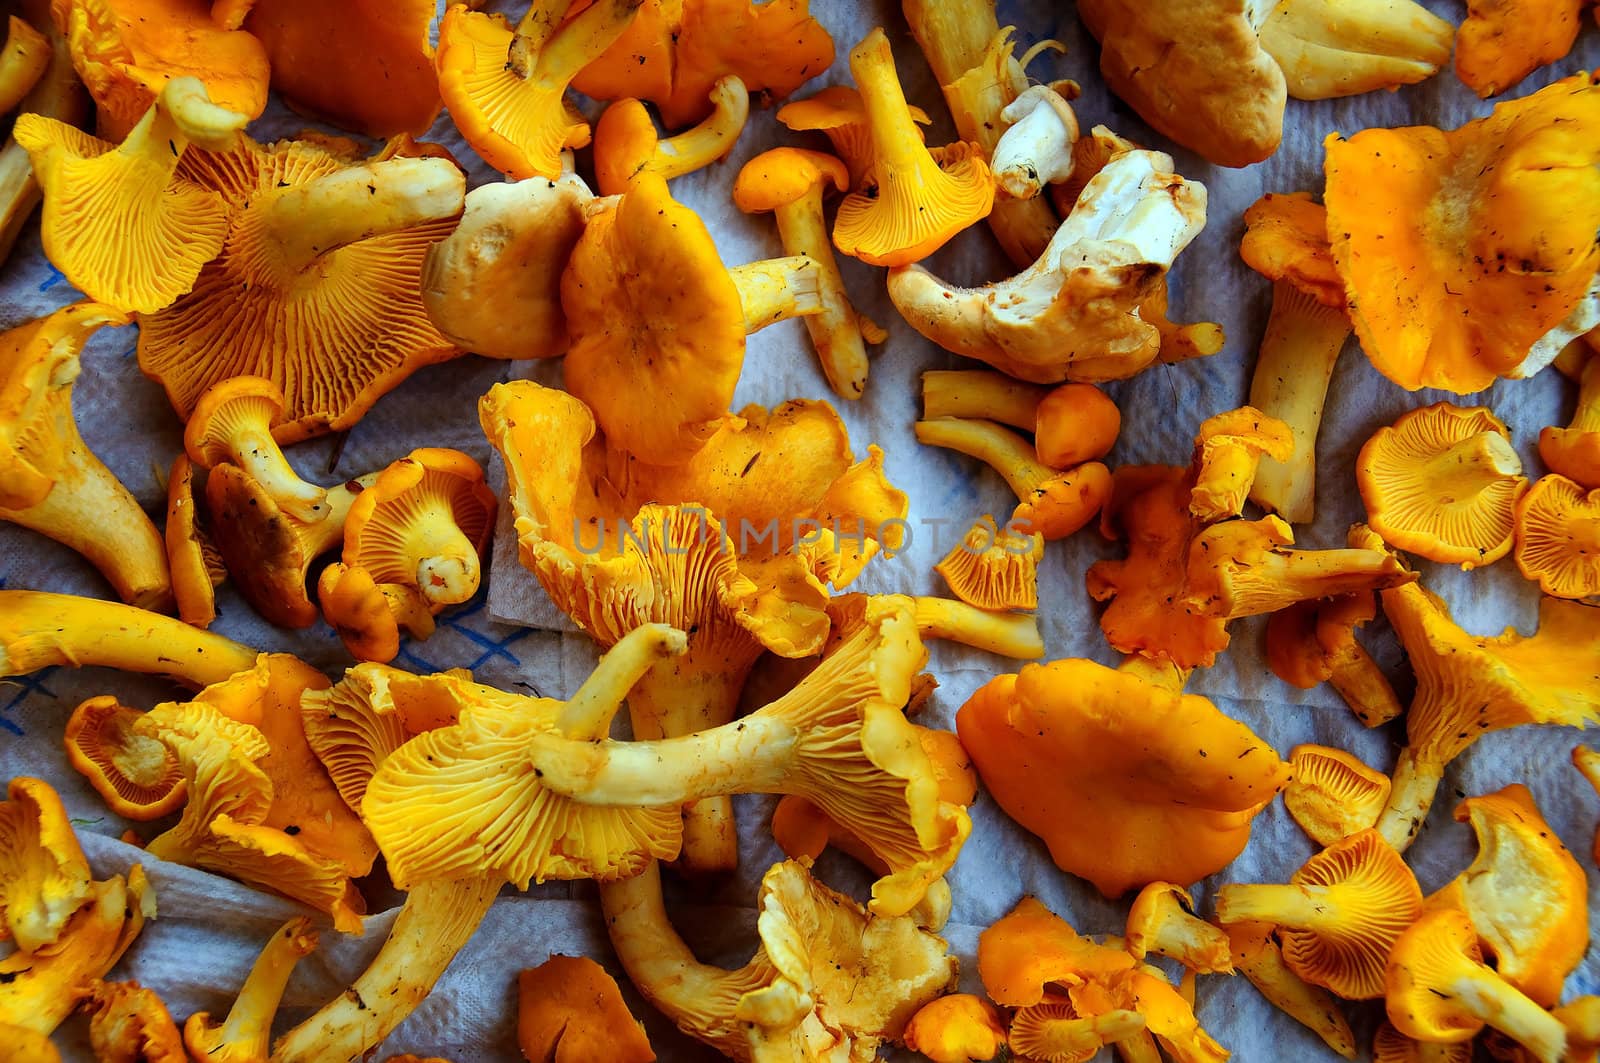 Preparing, cleaning and drying chanterelles